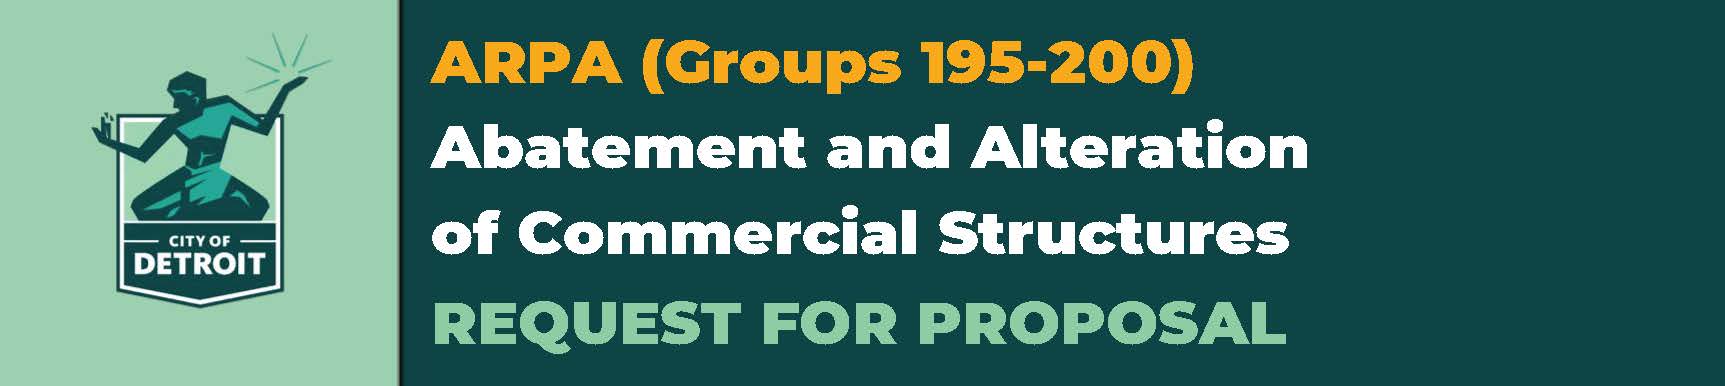 ARPA (Groups 195-200) Abatement and Alteration of Commercial Structures